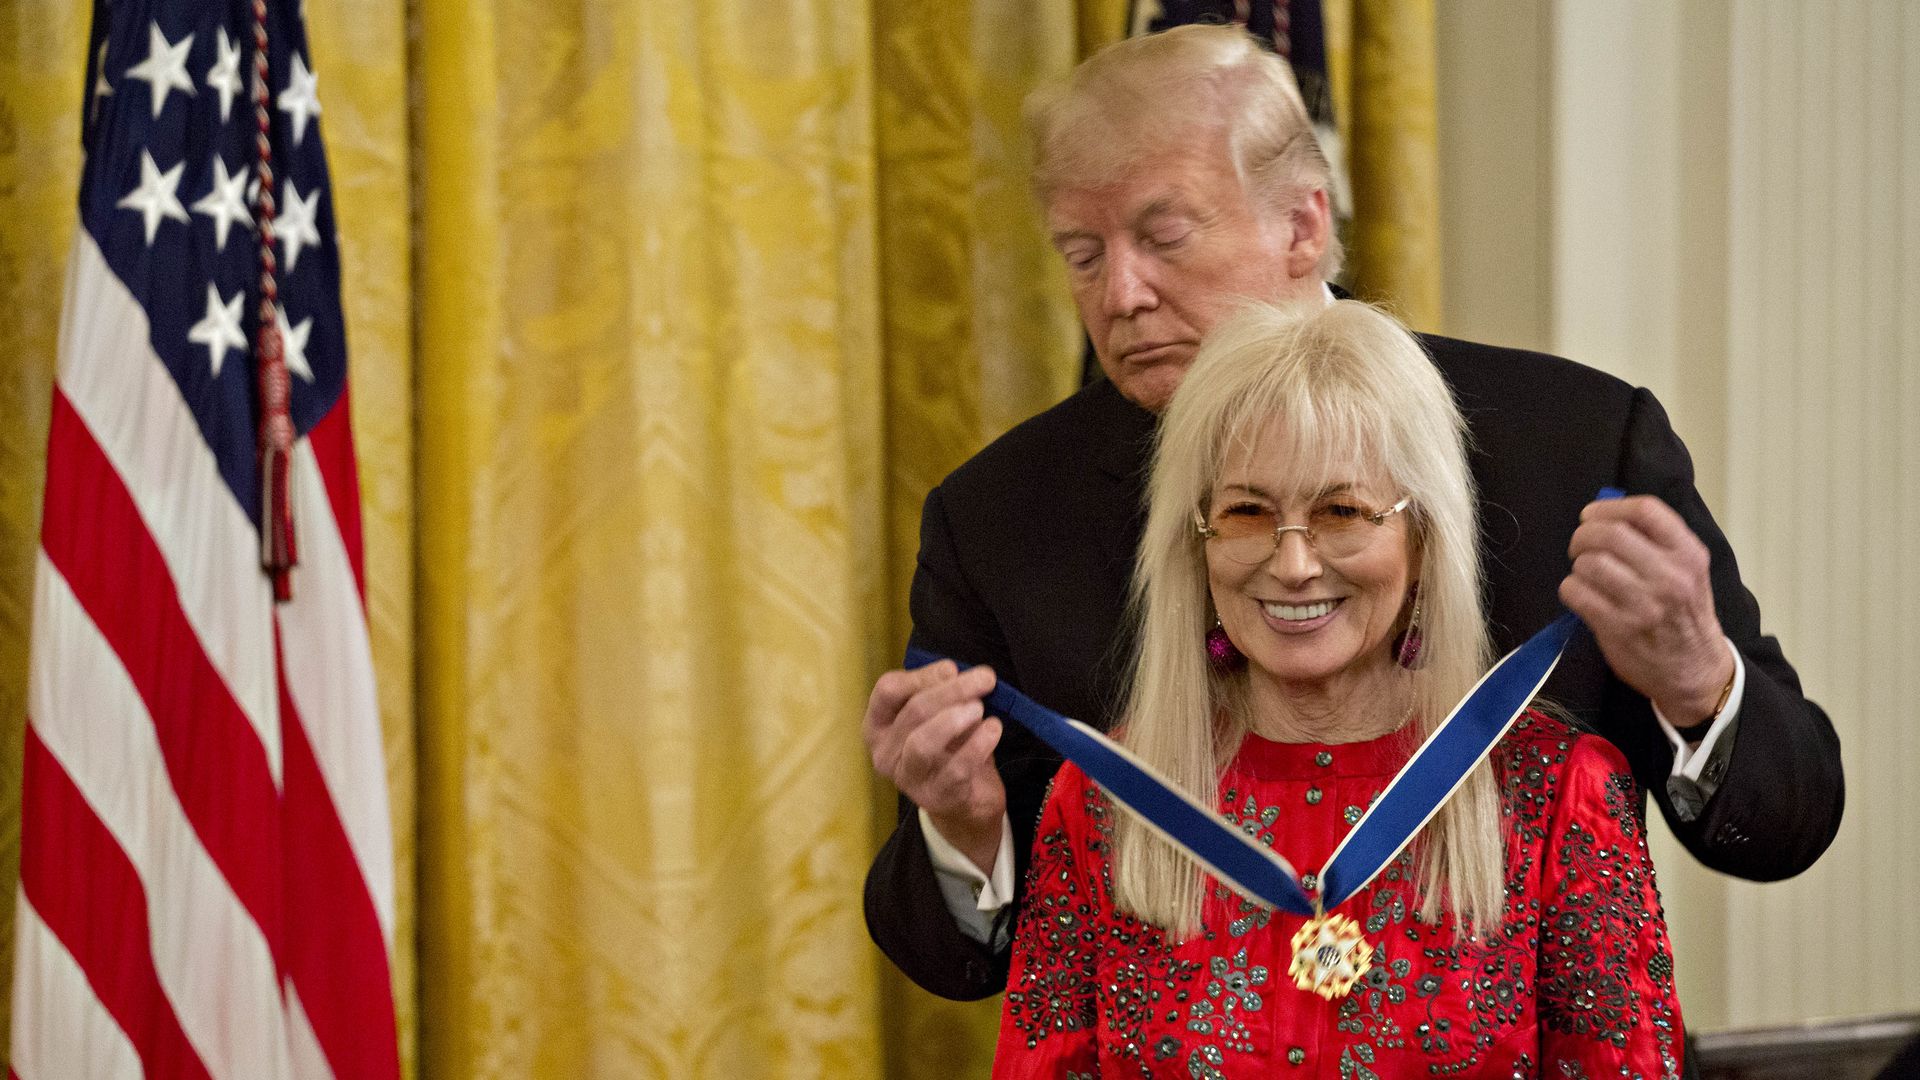 President Trump is seen presenting the Presidential Medal of Freedom to Miriam Adelson in 2015.